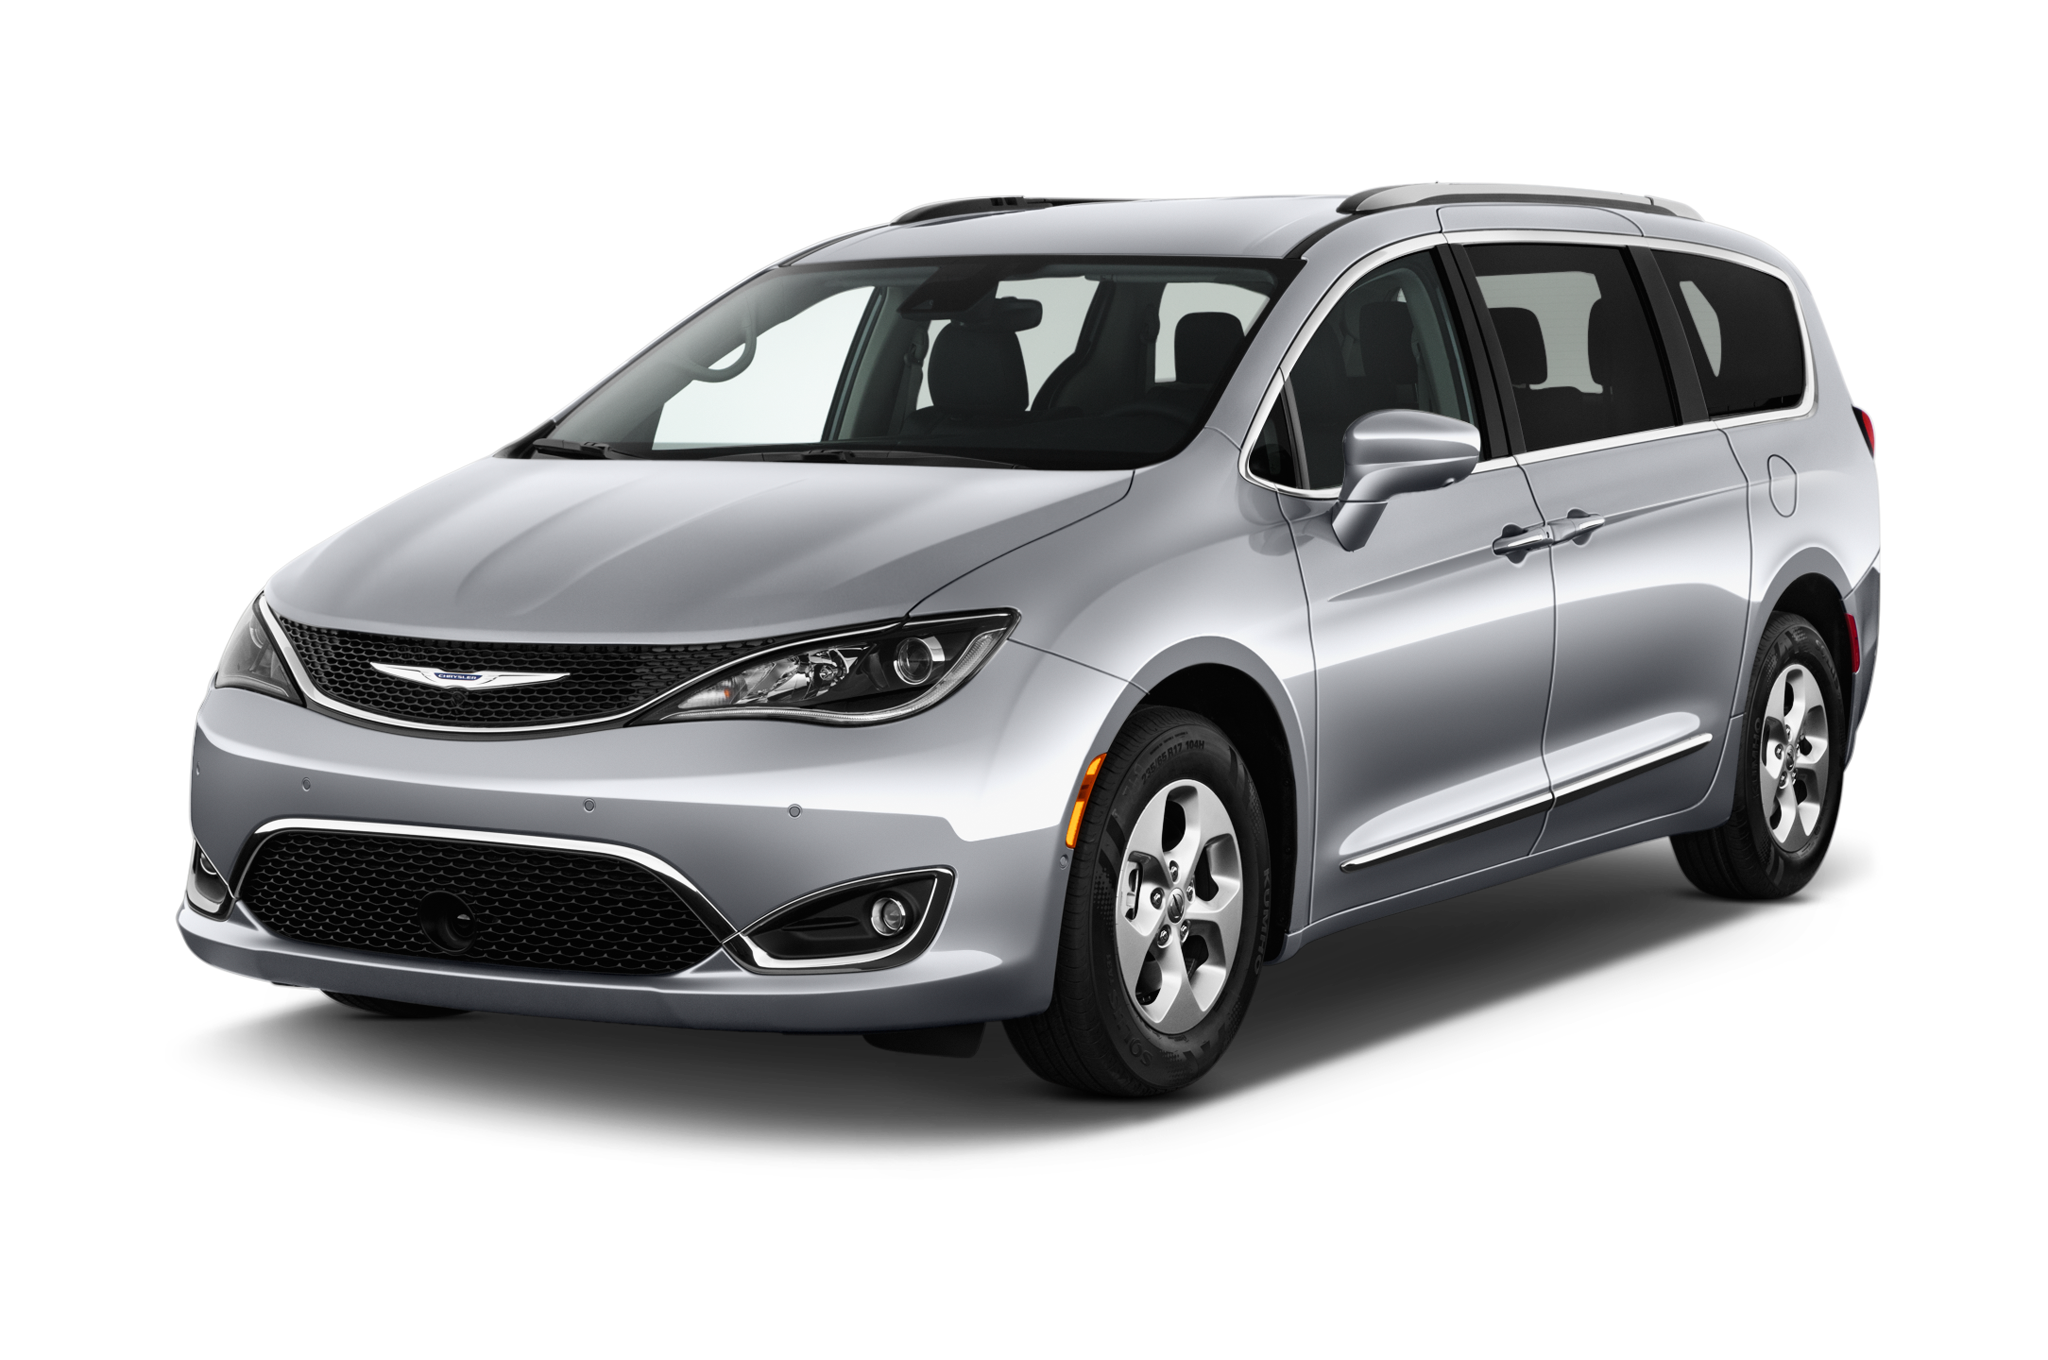 2018 Chrysler Pacifica Touring L Plus Specs and Features